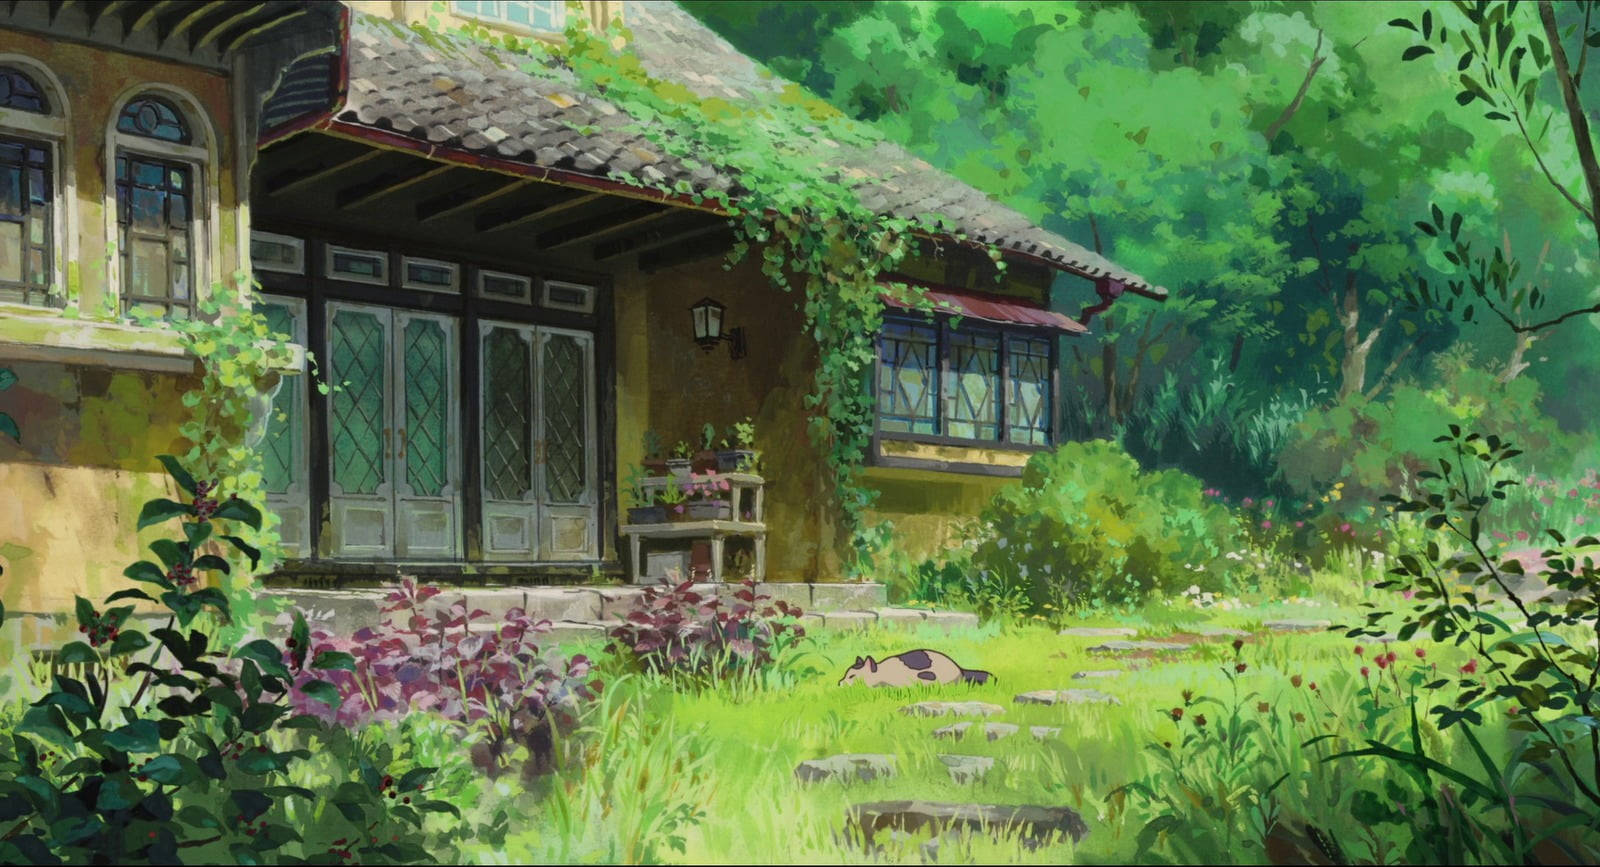 Studio Ghibli Scenery Old House With Cat